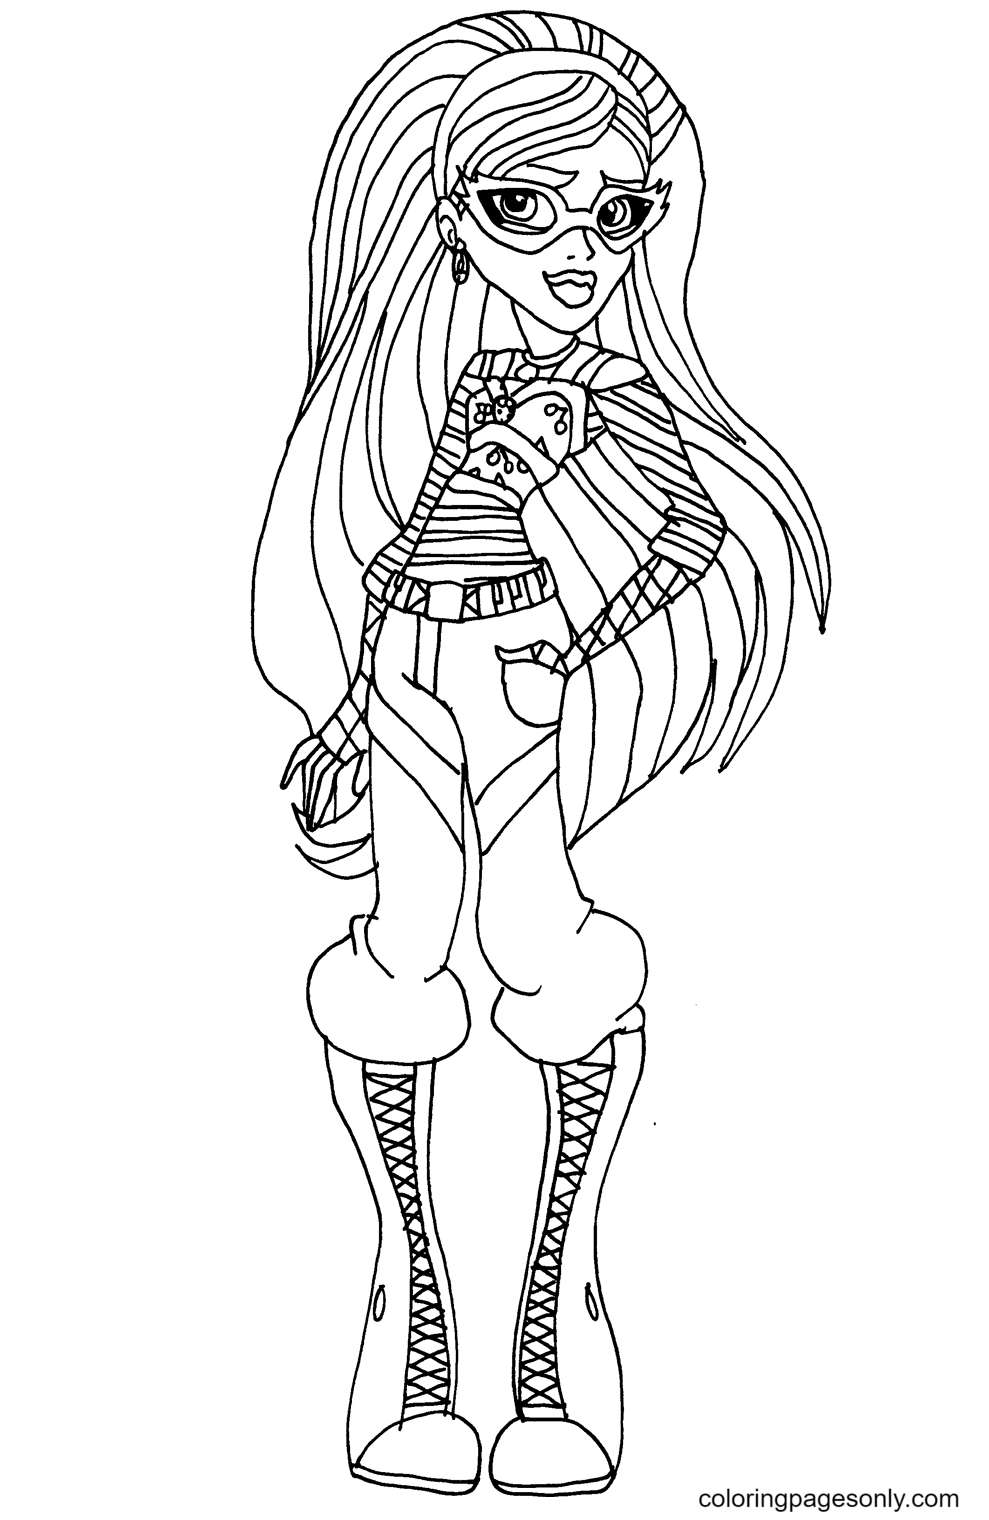 Monster High Ghoulia Yelps Coloring Page